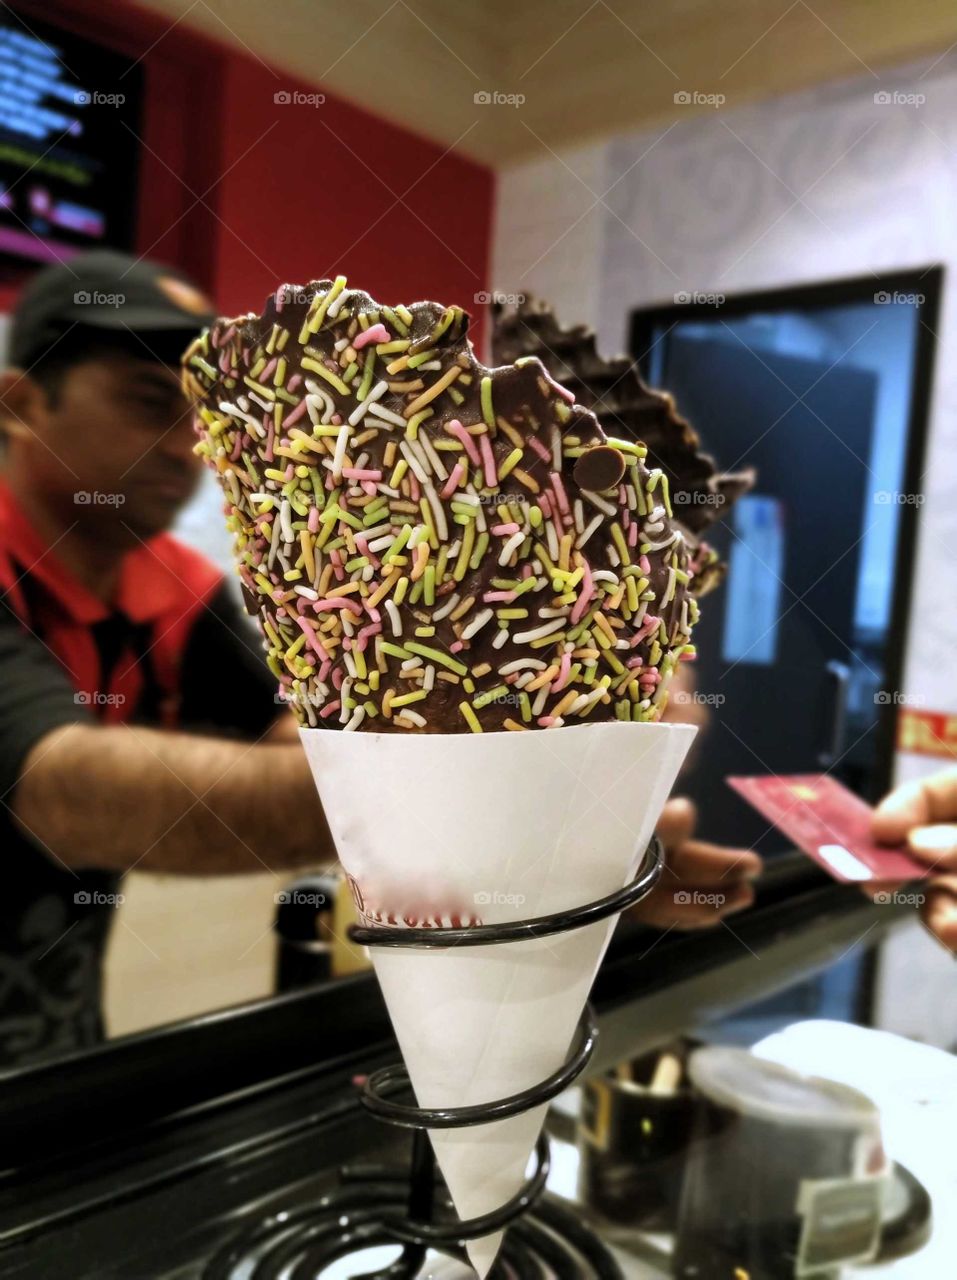 An ice cream scoop filled with love and happiness. Instagram: shafiggue.k